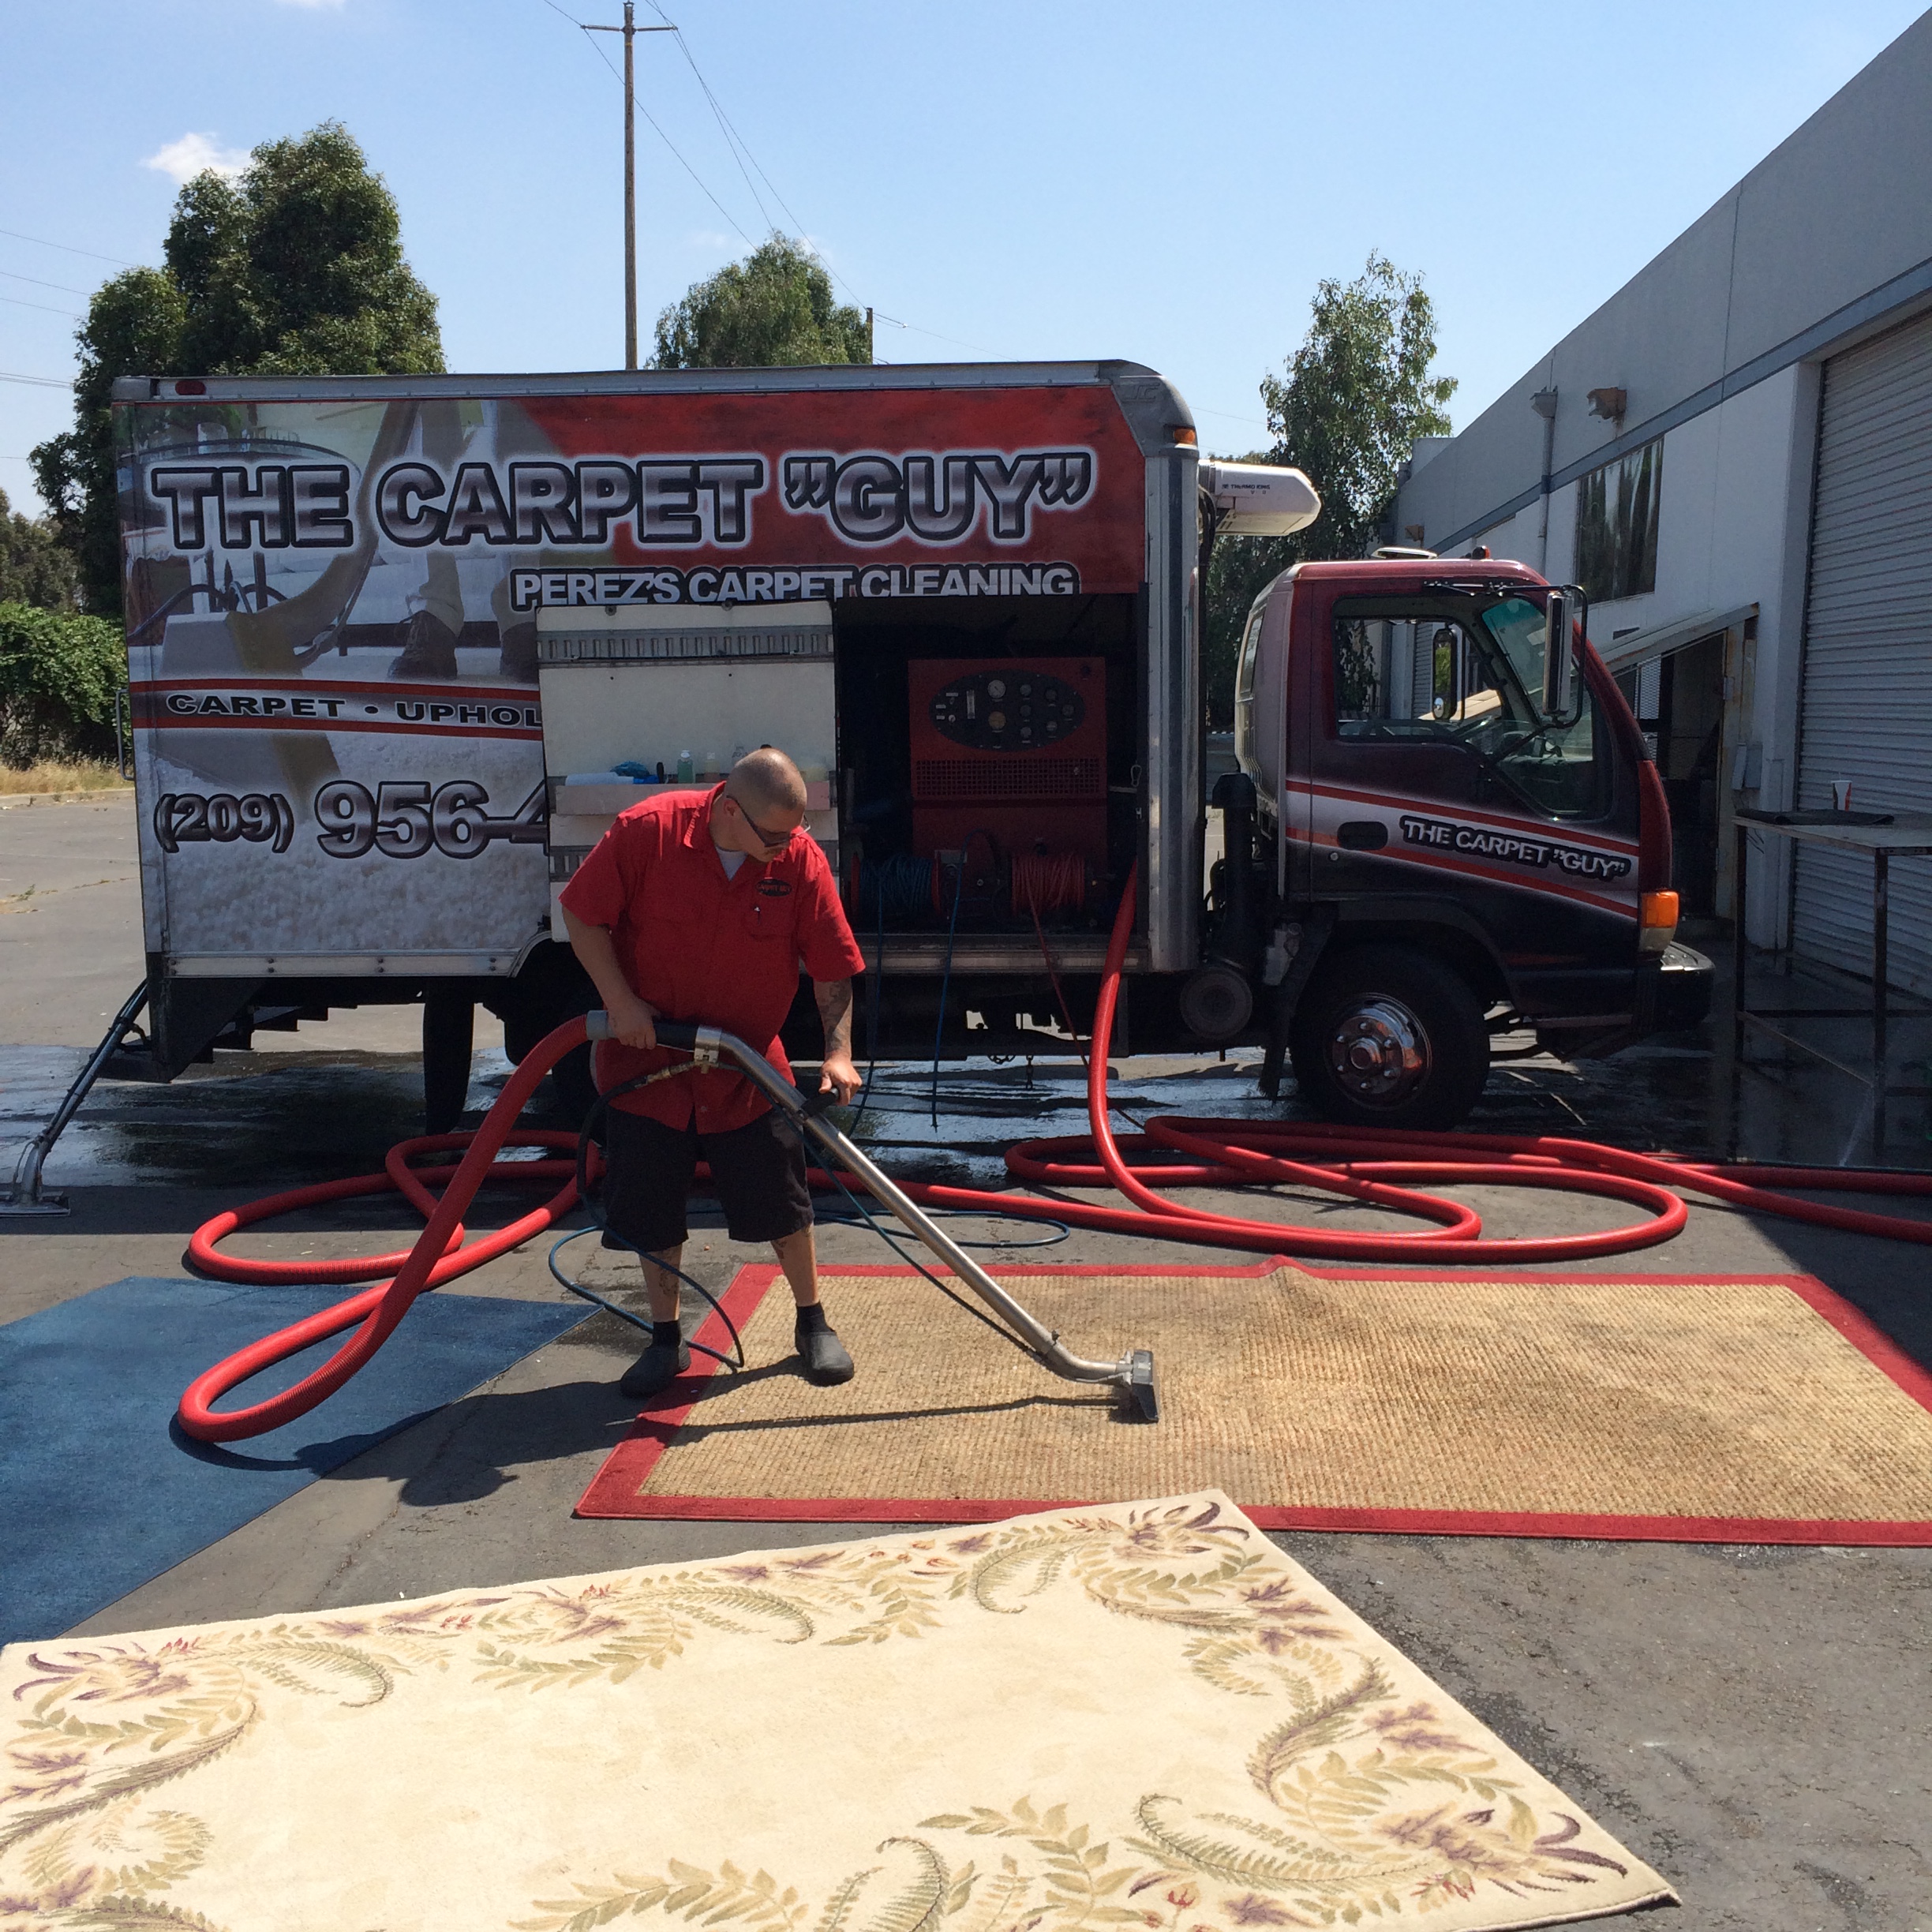 Carpet Cleaning Same Day Service Company